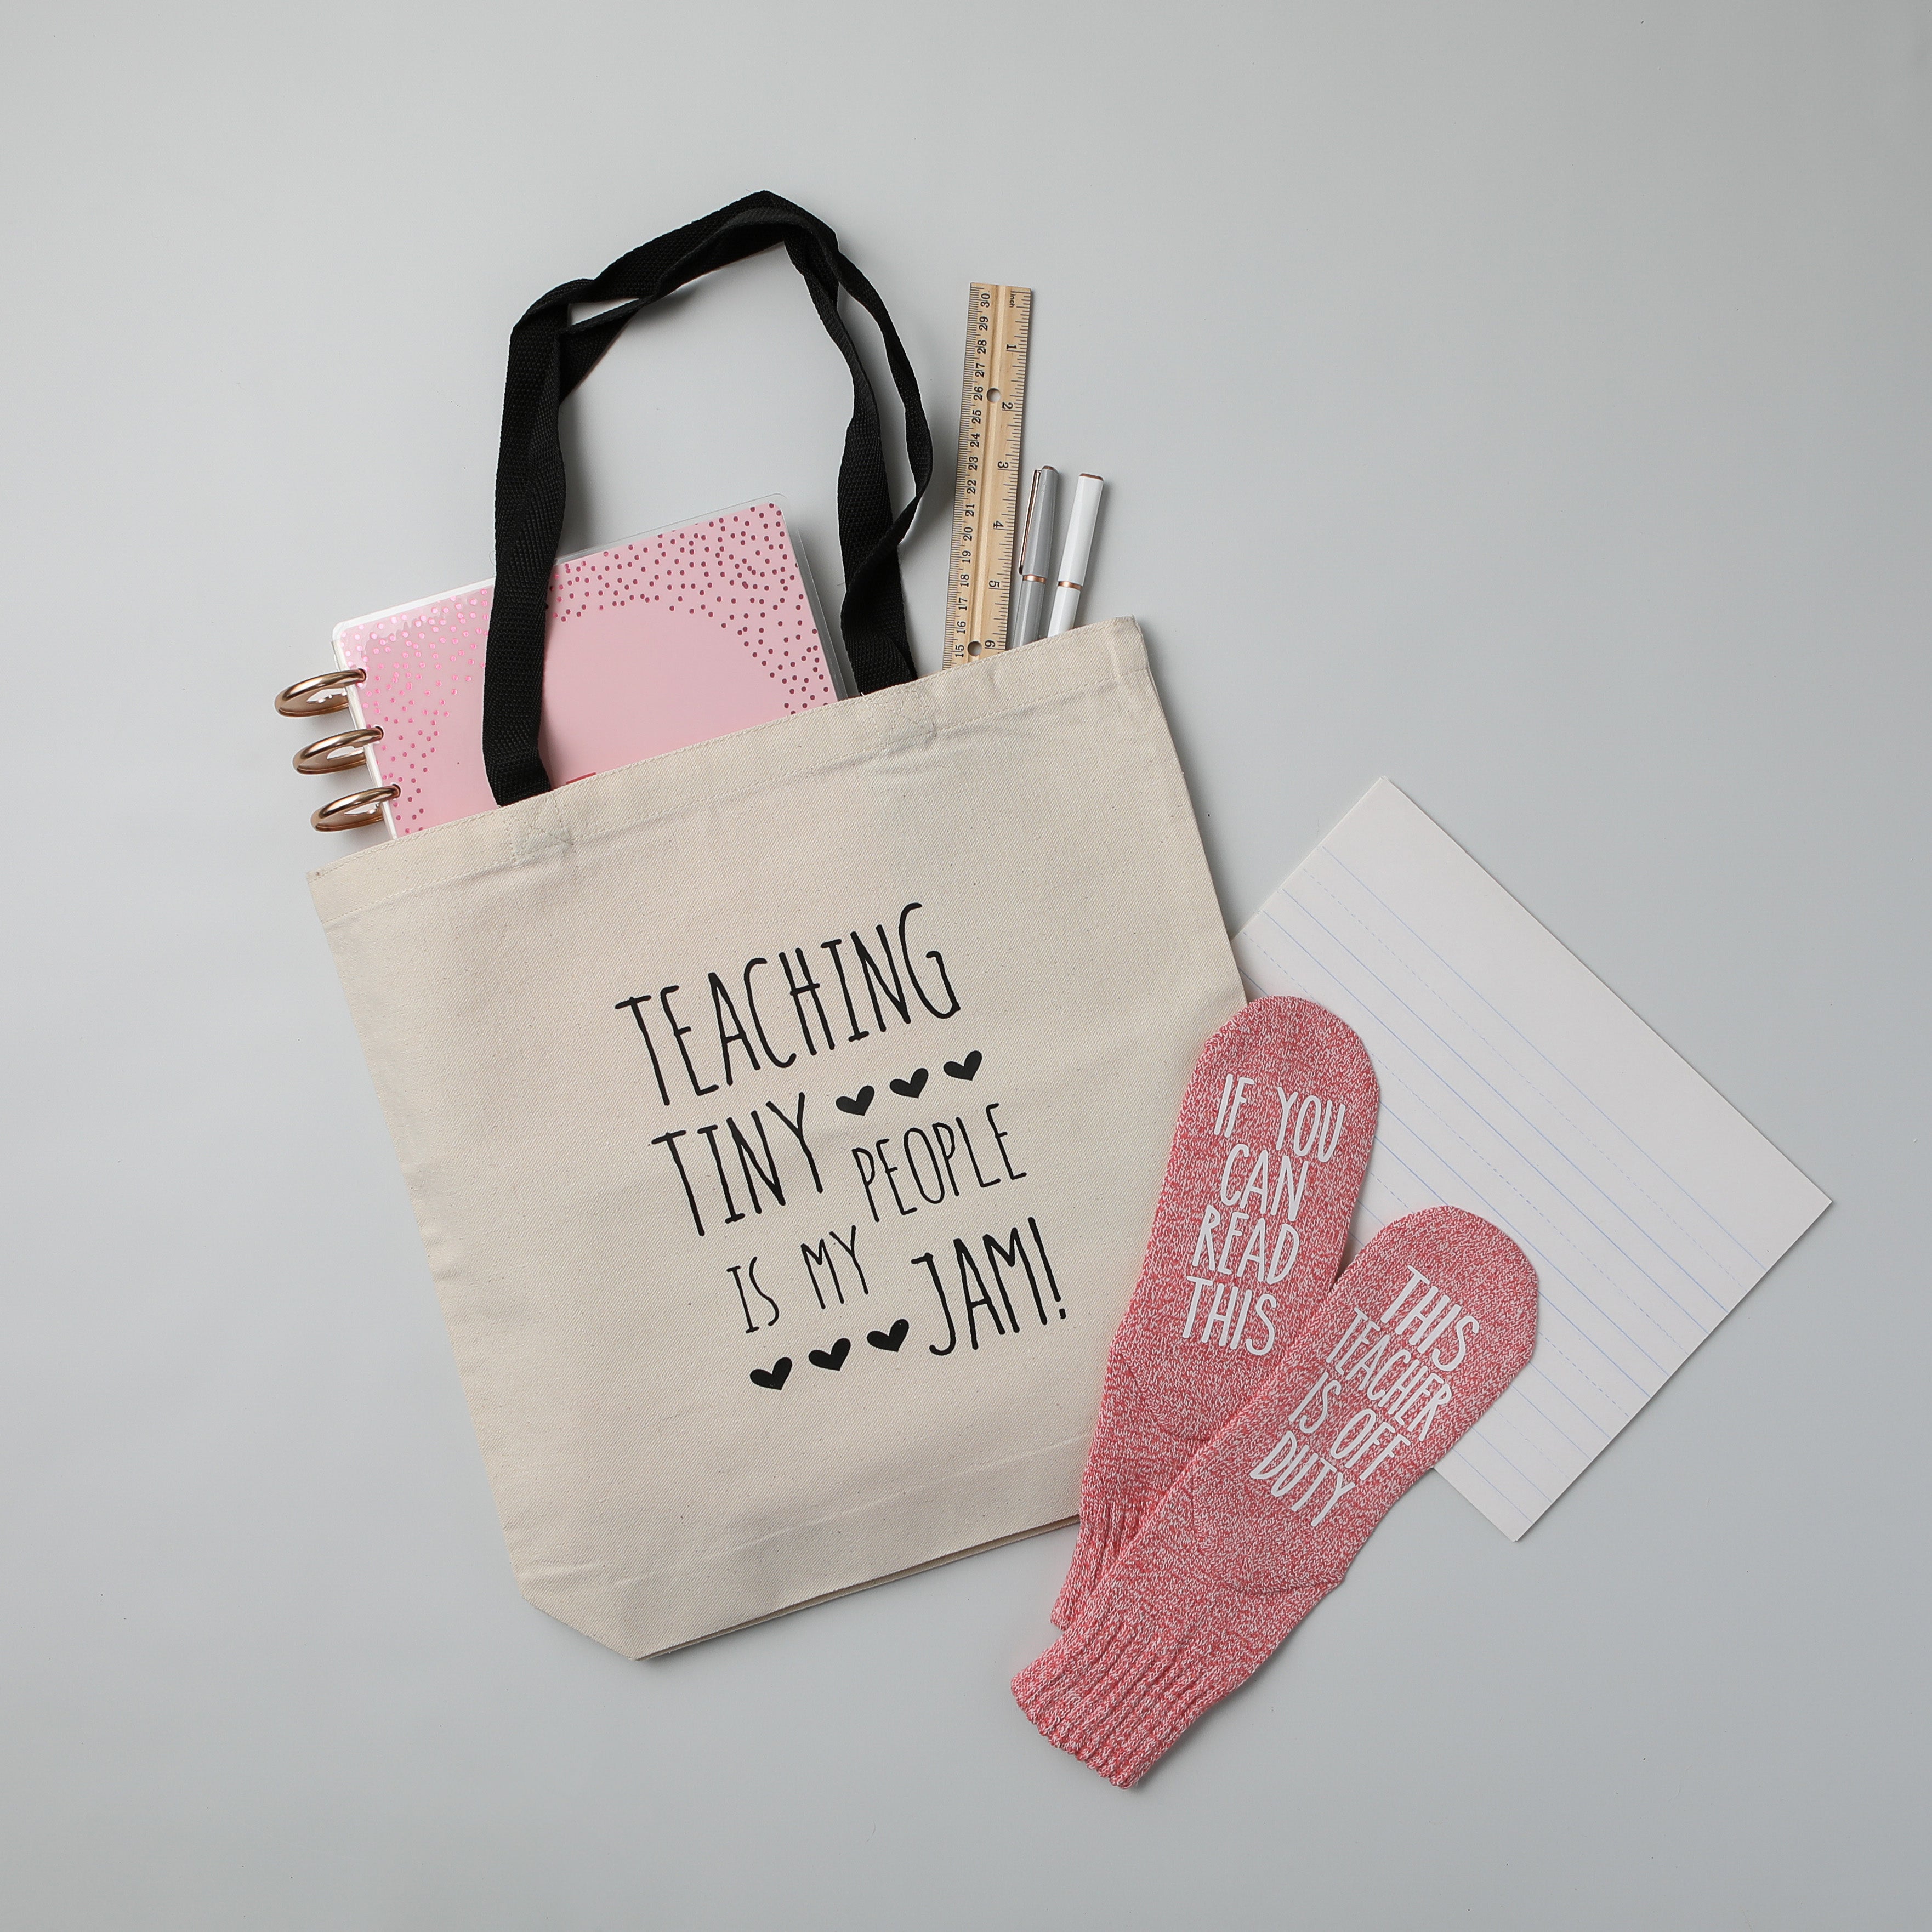 Get Outside and Read Tote Bag